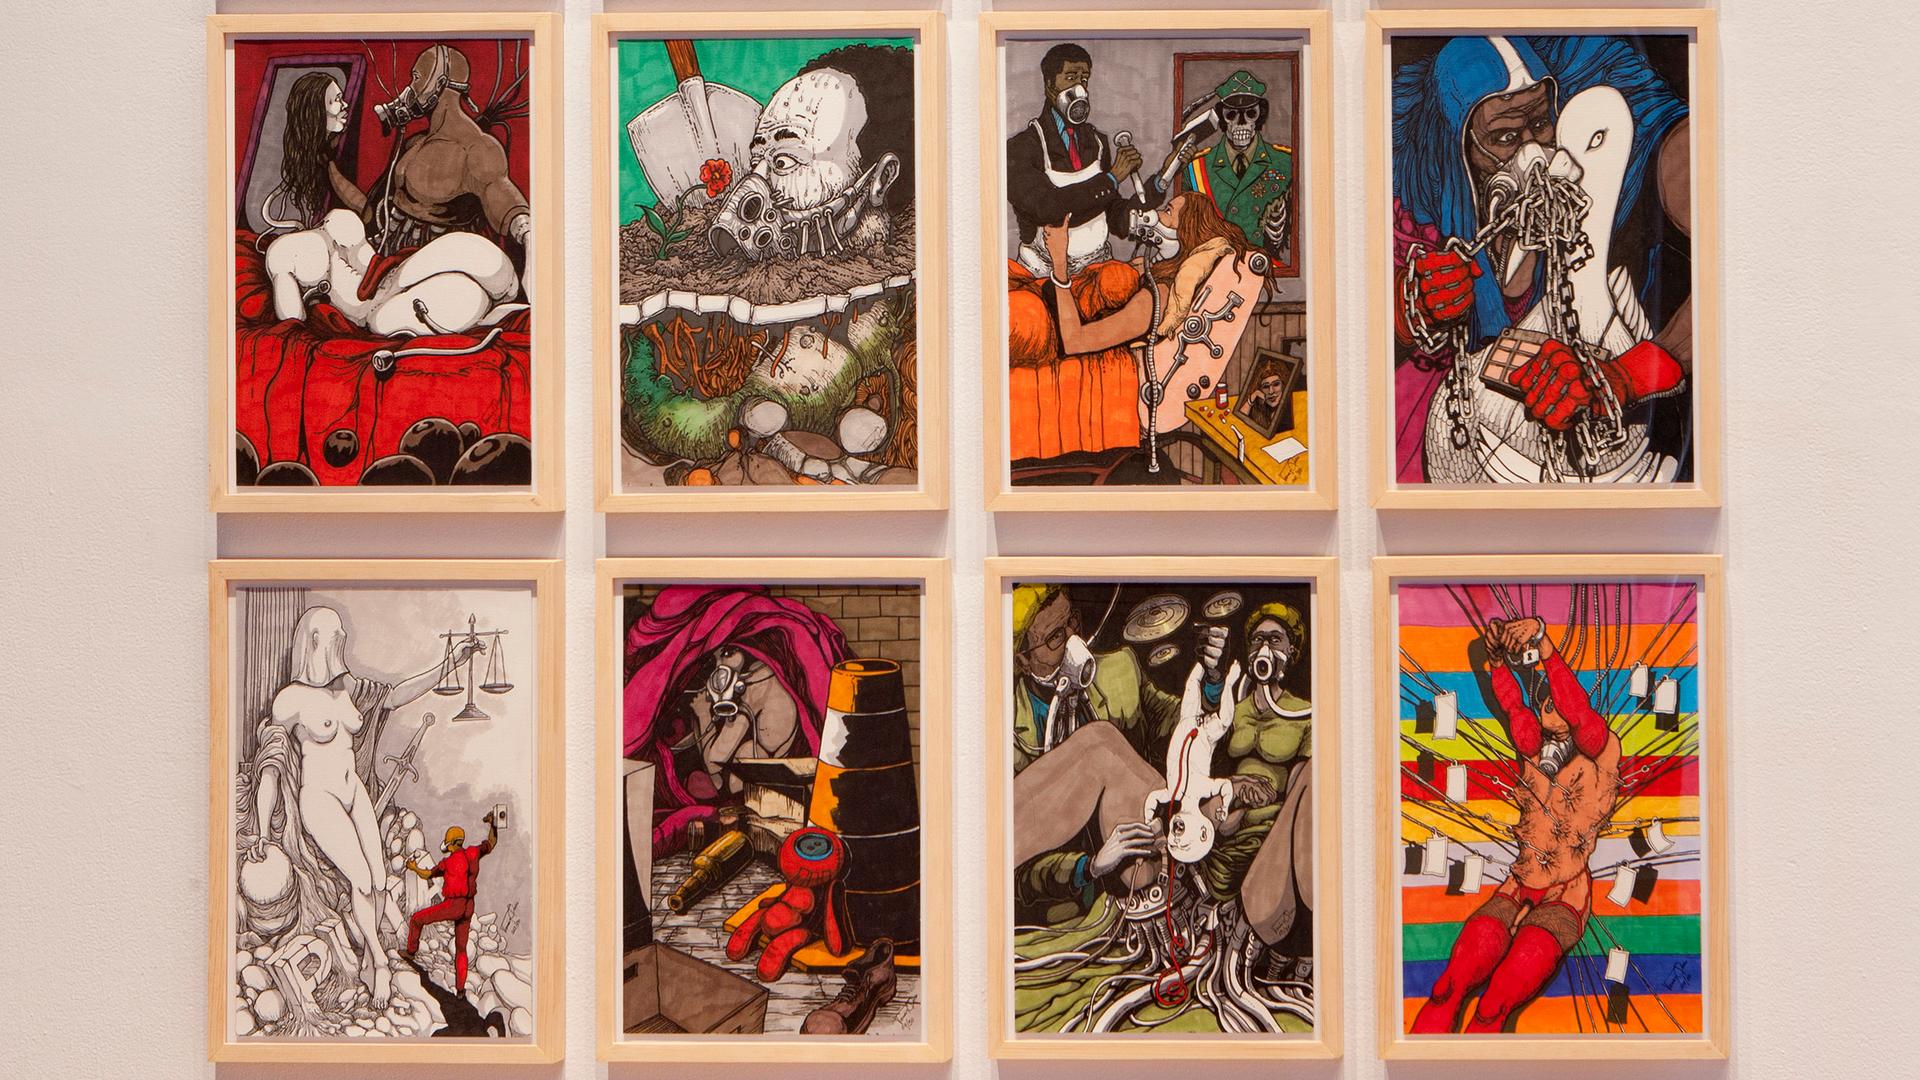 The work of Ramón Esono Ebalé at the University of South Florida Contemporary Art Museum.